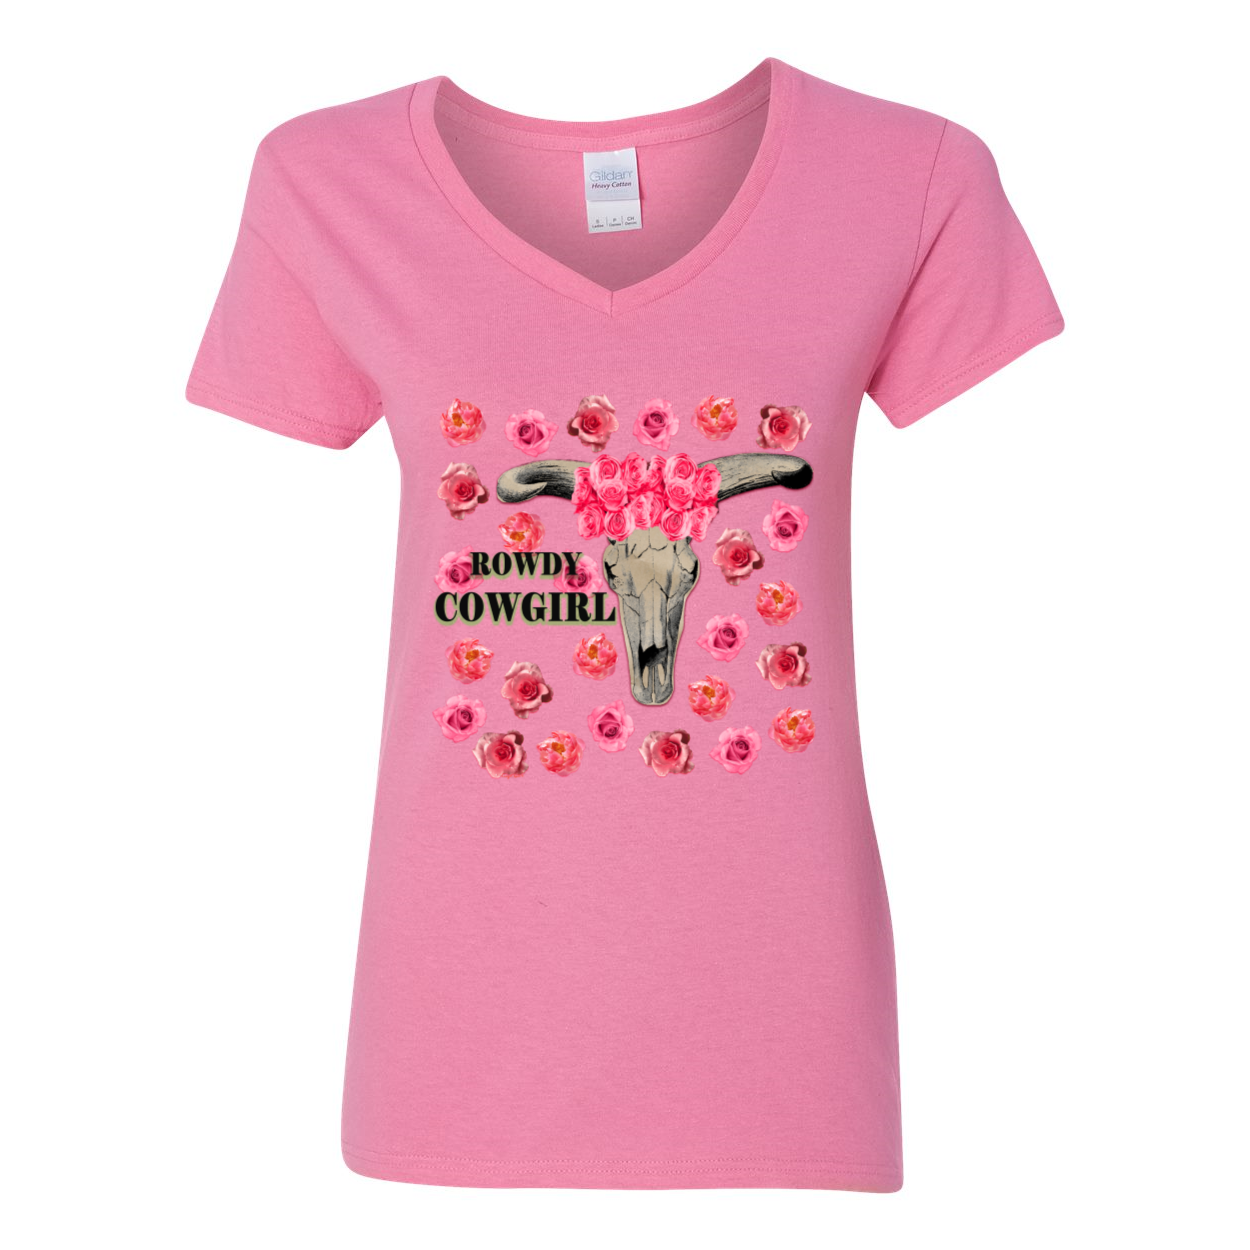 Cowgirl Roots™ Rowdy Cowgirl V-Neck T-Shirts